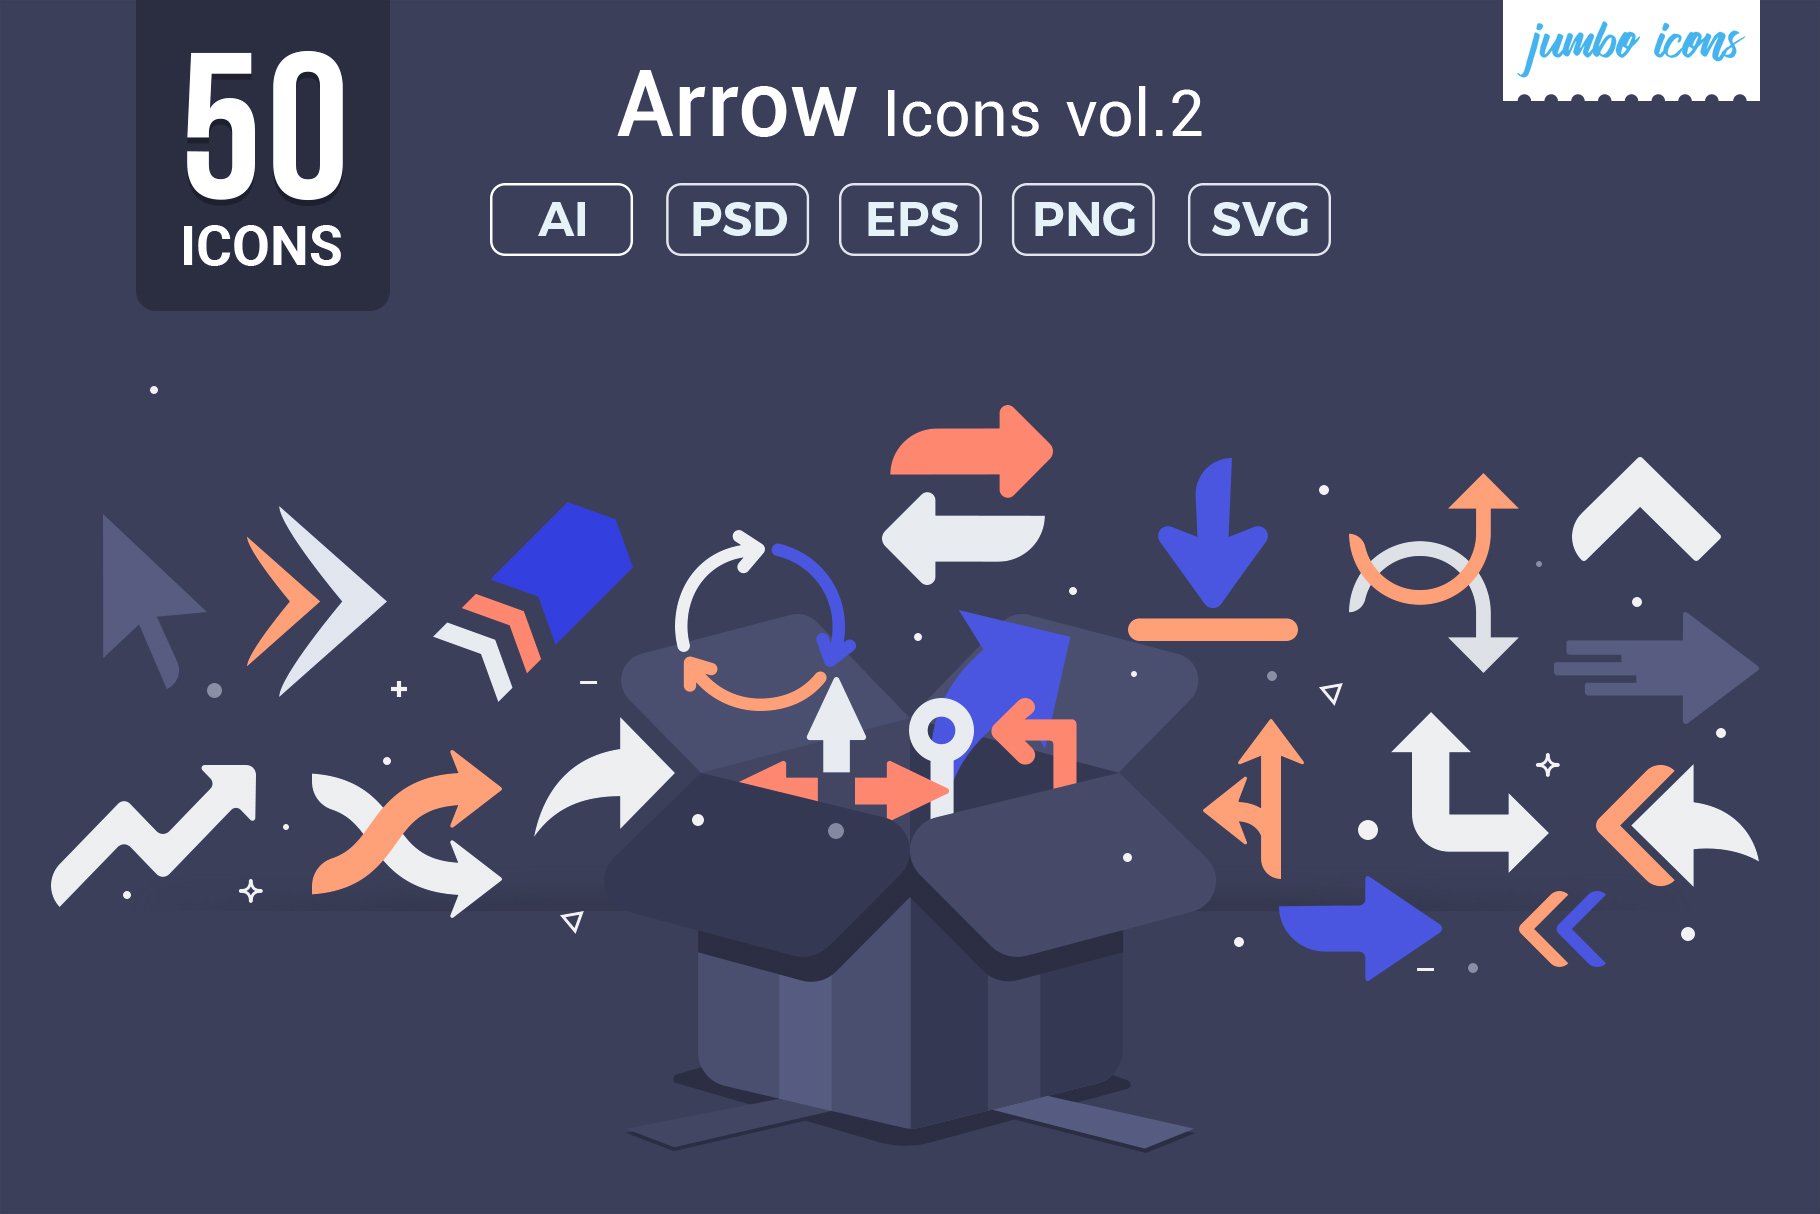 Arrows Vector Icons V2 cover image.